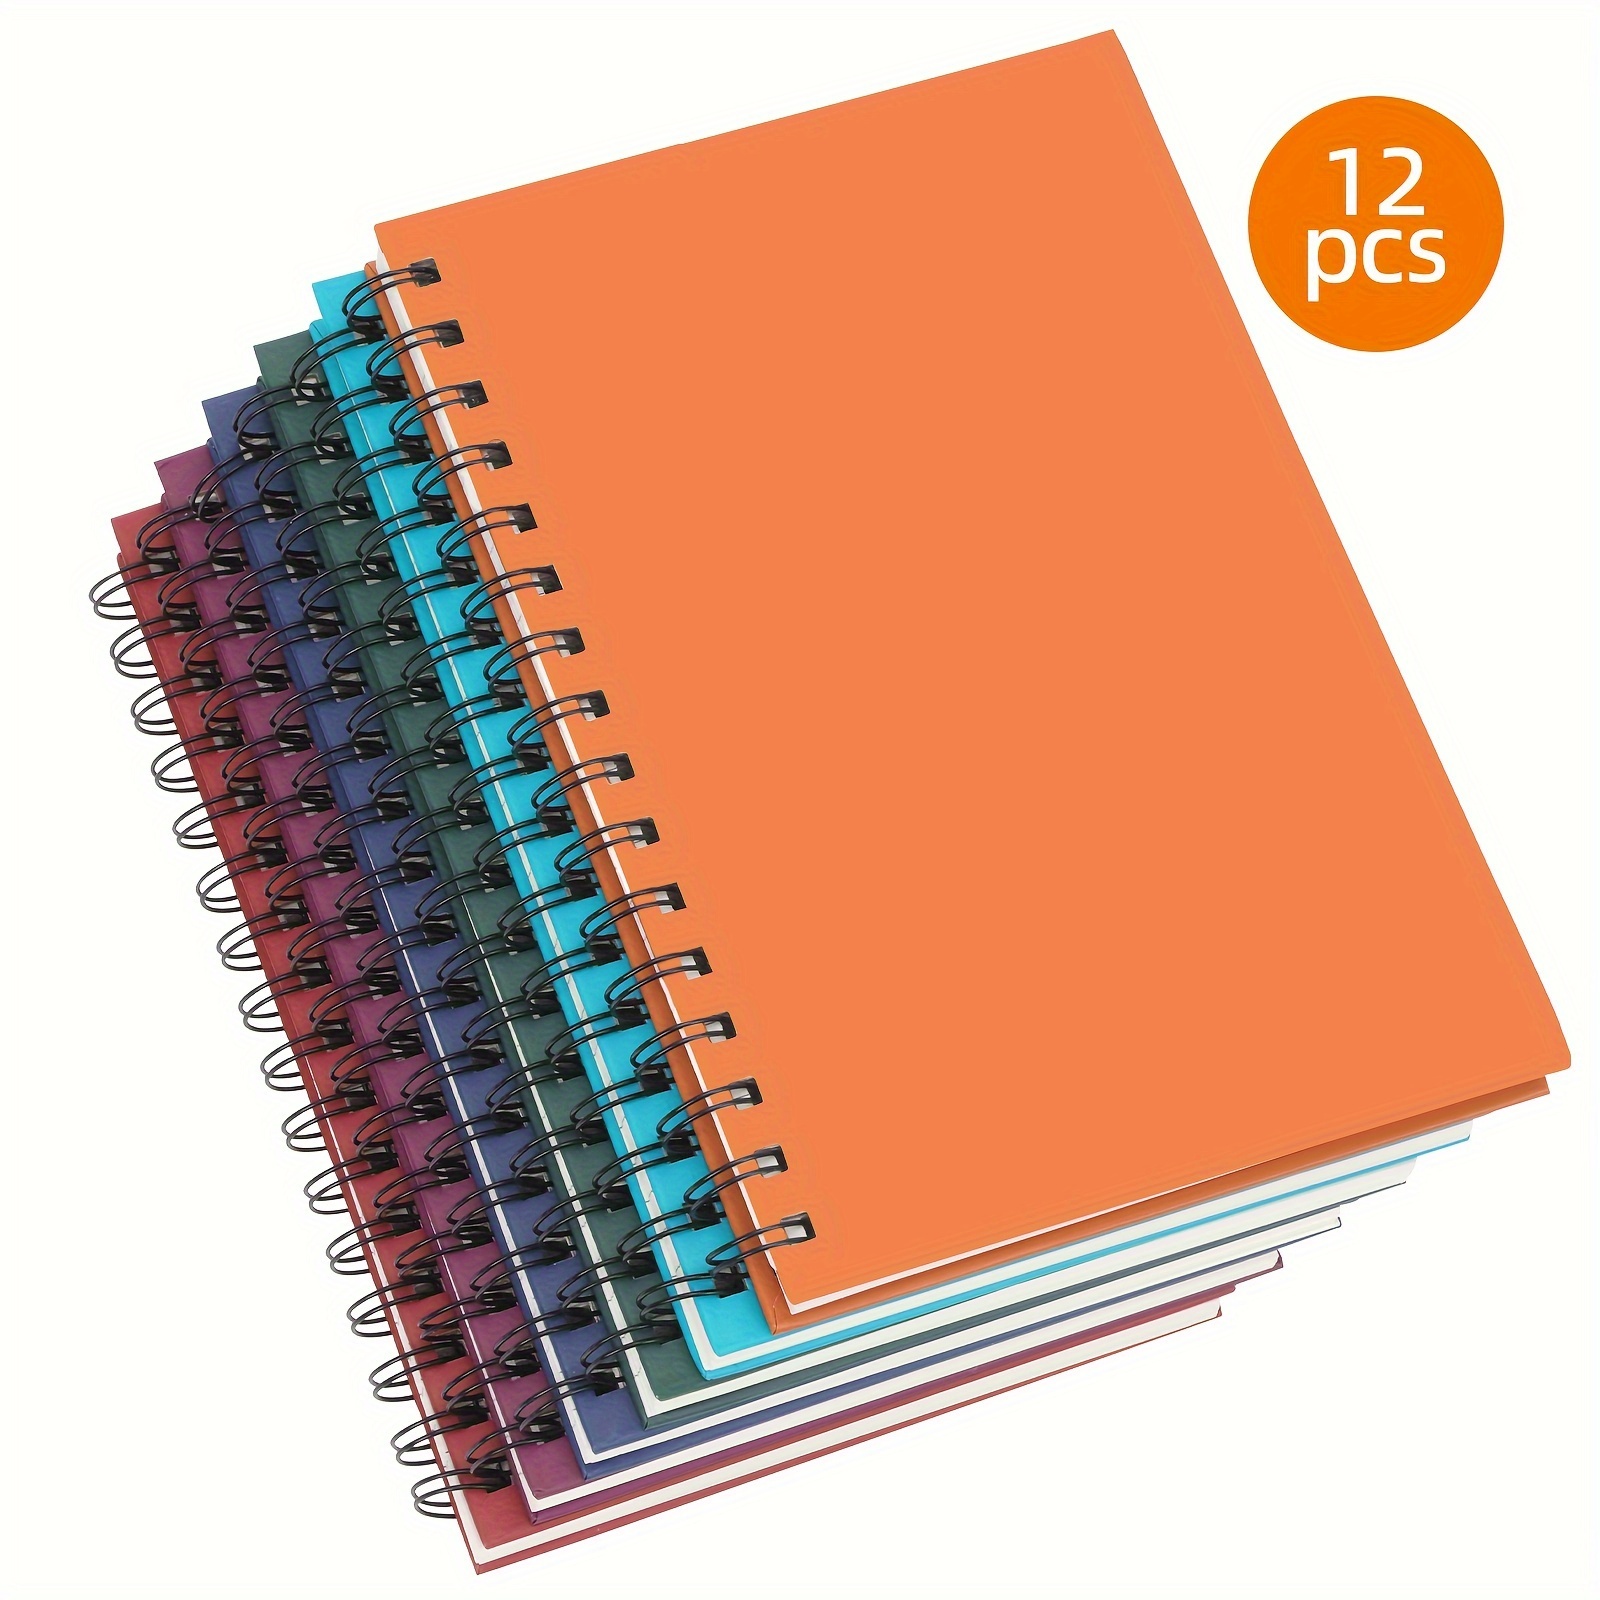 

12pcs Hardcover Spiral Notebook, Spiral Journals, College Ruled, 100gsm Thick Paper, Assorted Jewel Tone Colors, 160 Pages, For Work, School And Gifts, 5.5x8.5 Inches